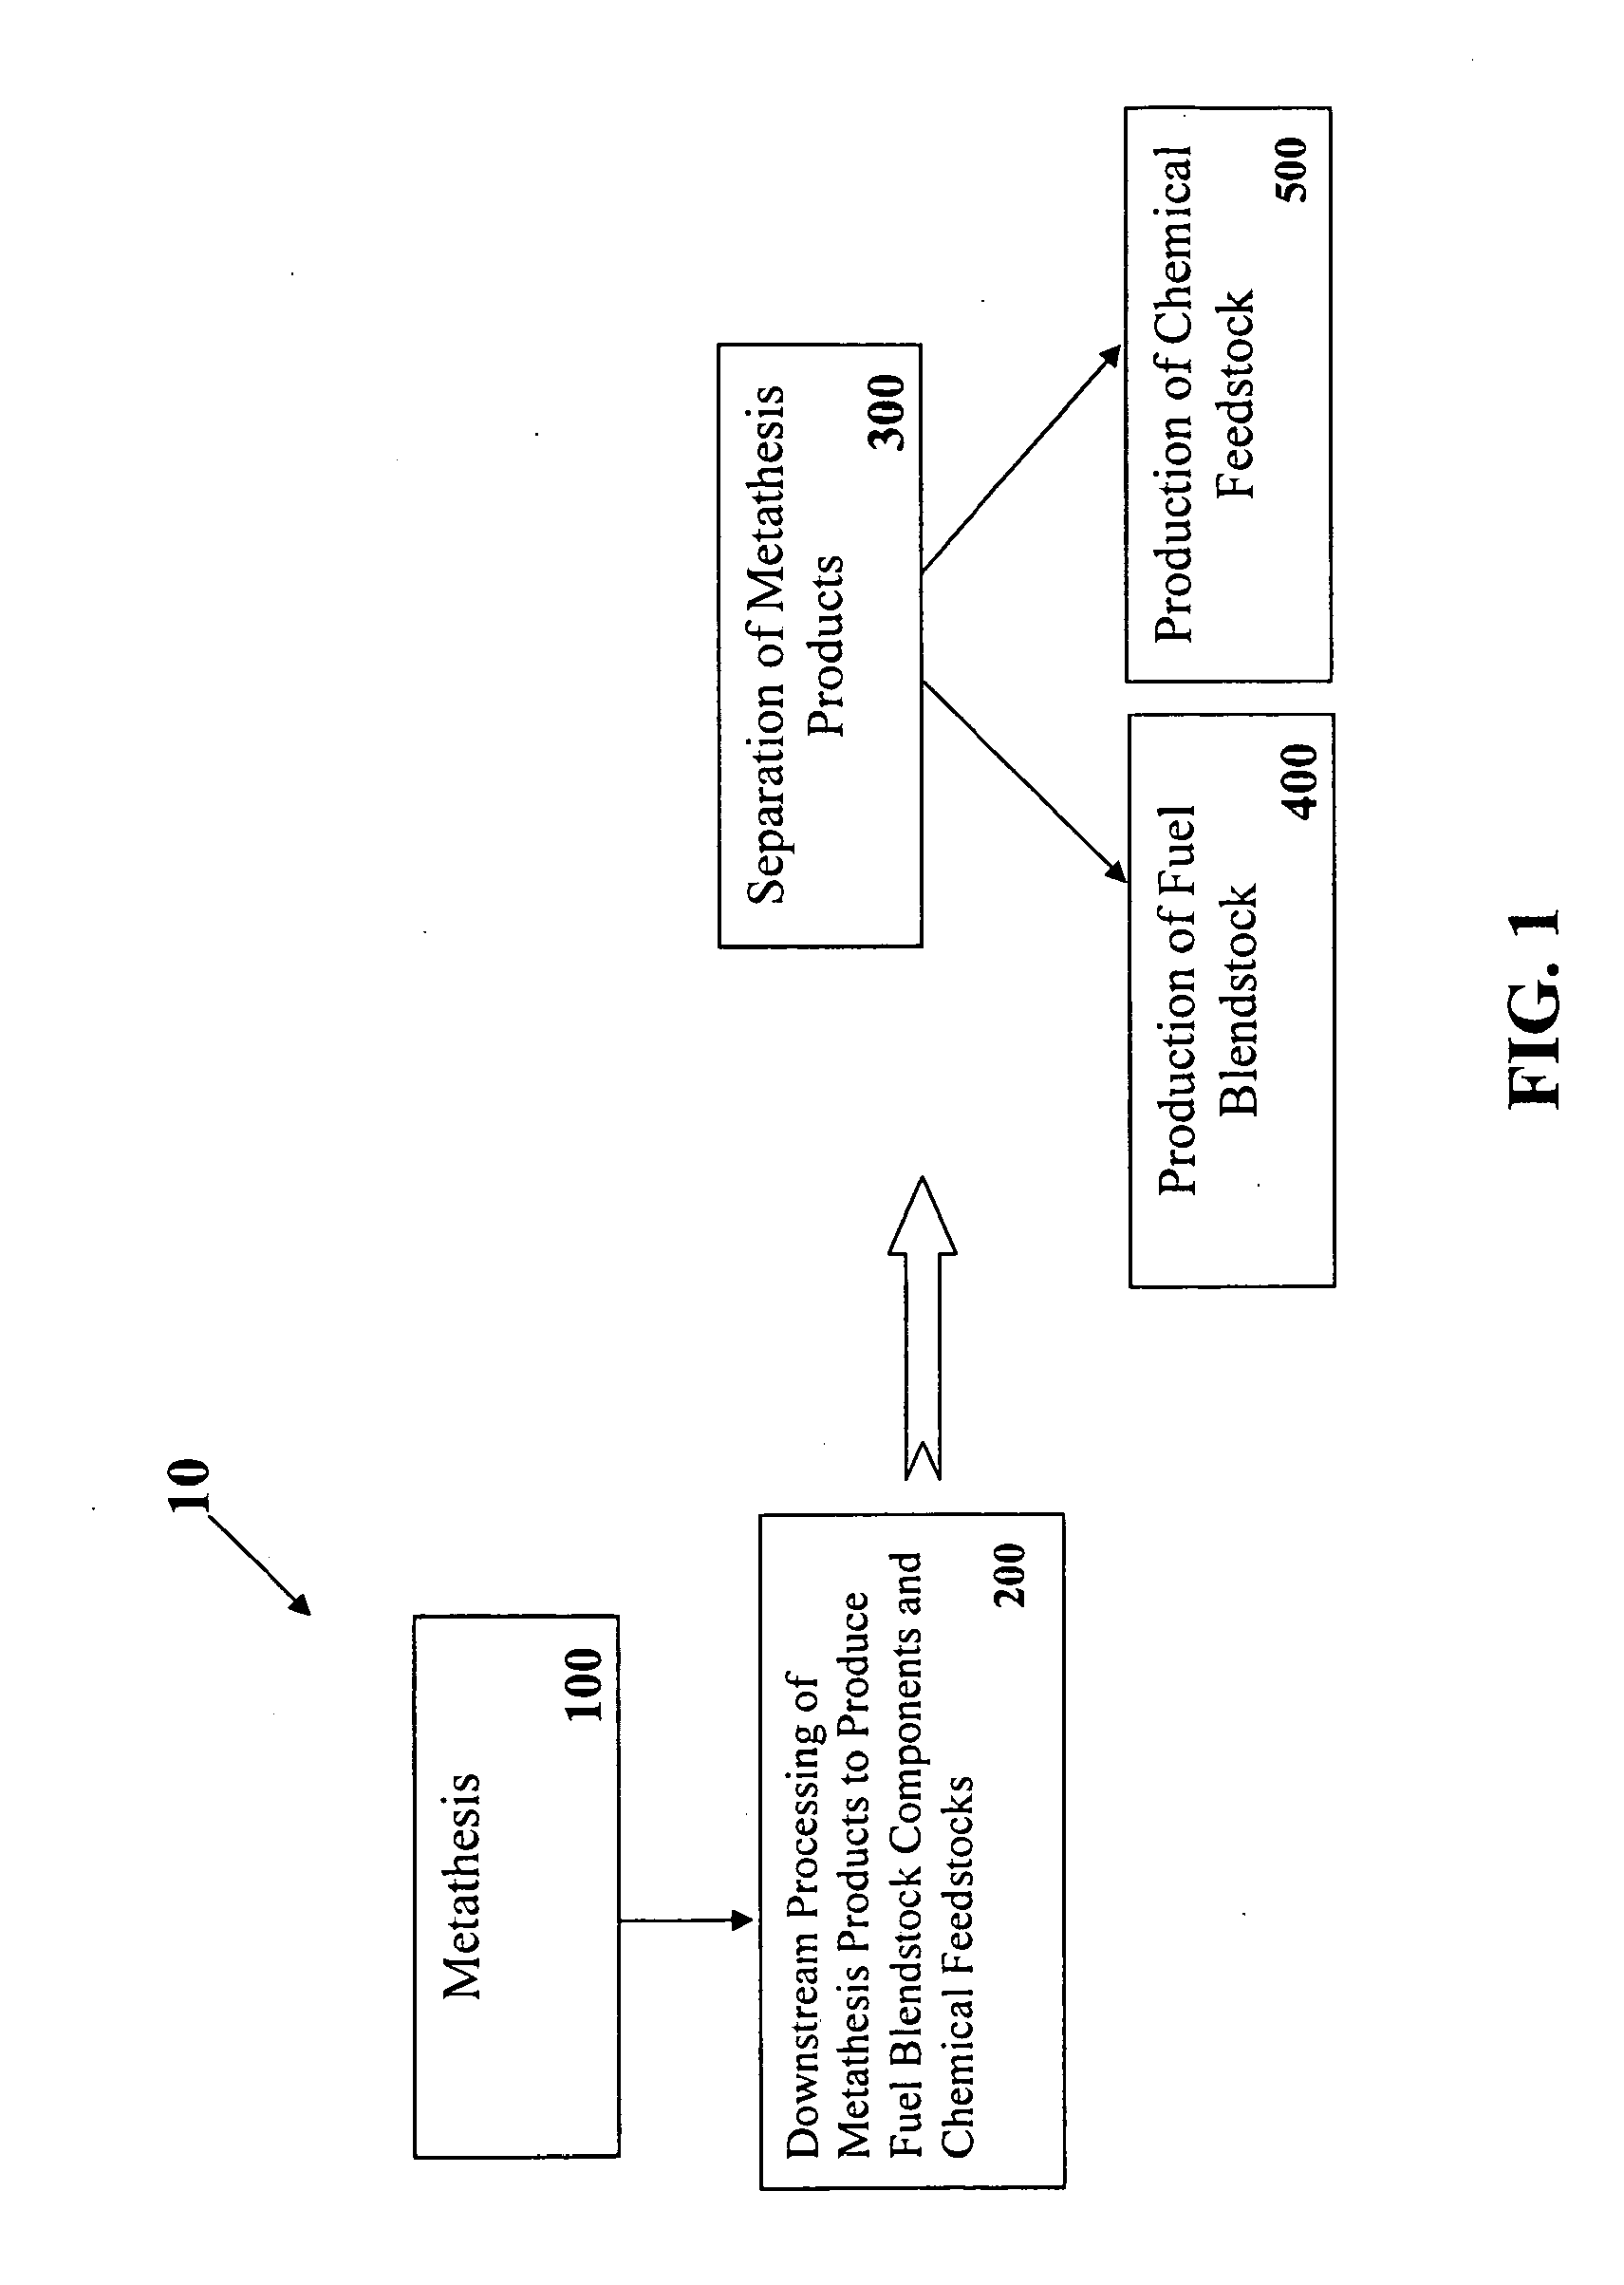 Chain-selective synthesis of fuel components and chemical feedstocks